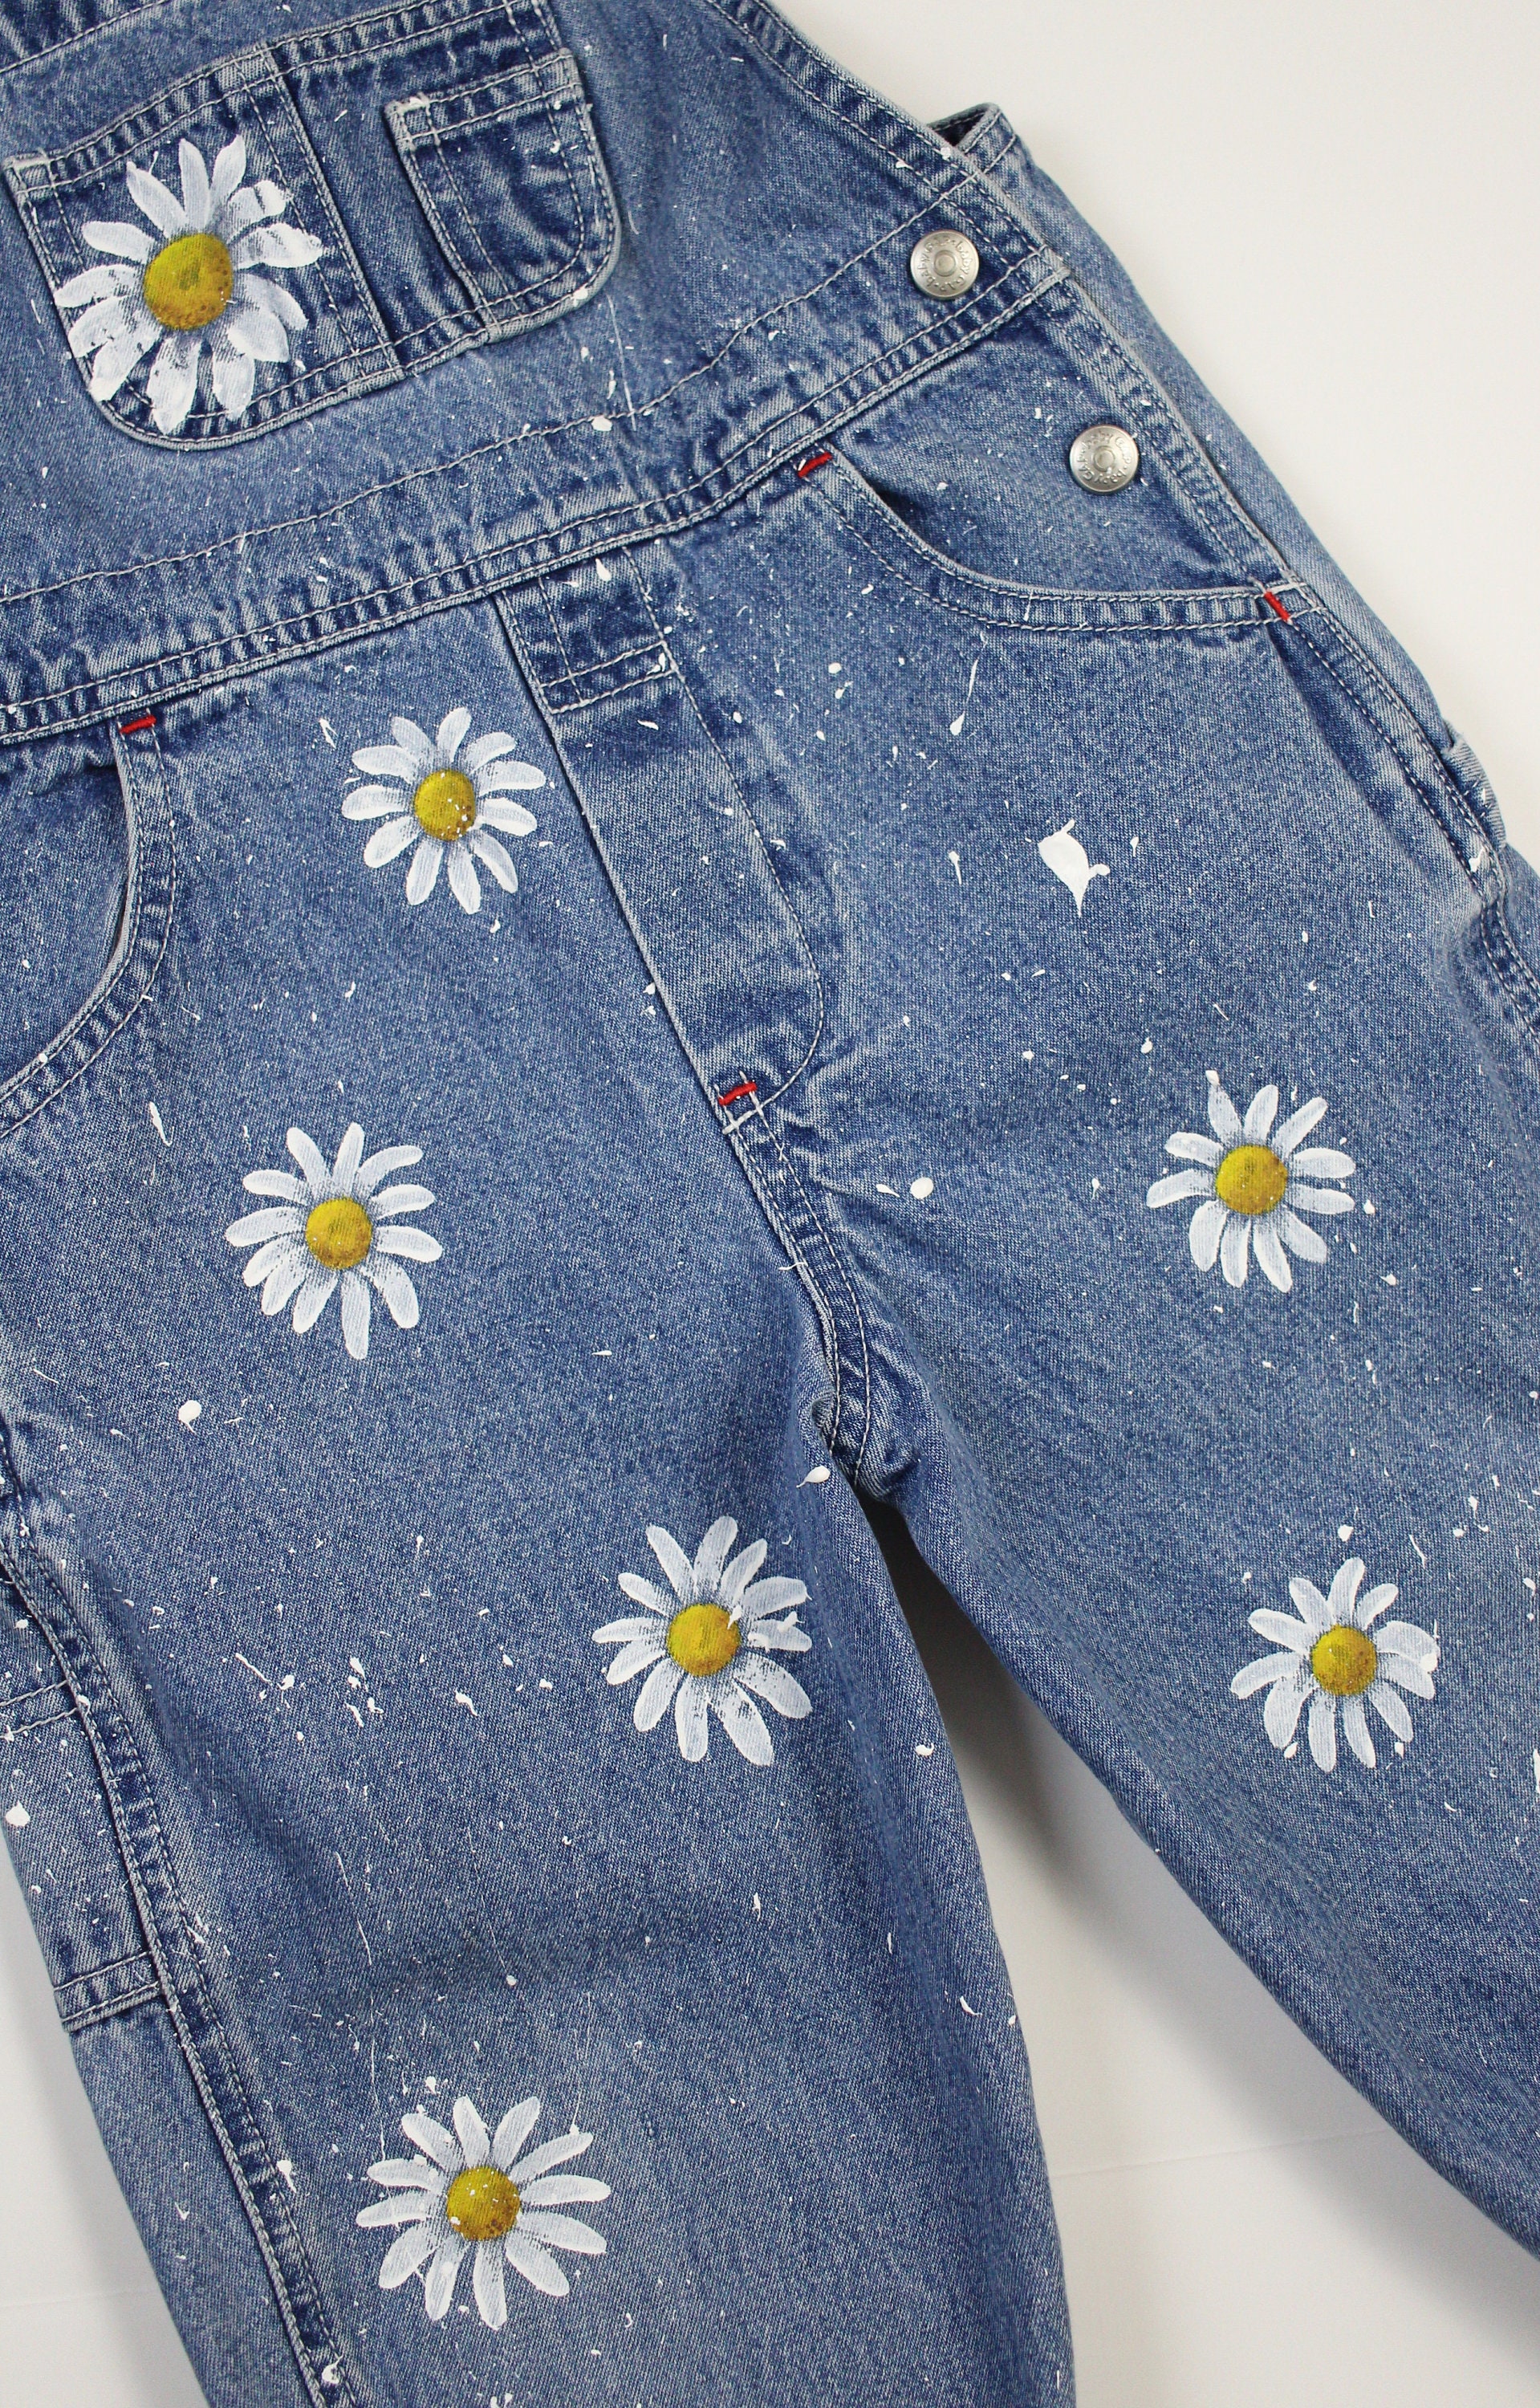 Kids Painted Overalls Custom Overalls Painted Jeans - Etsy